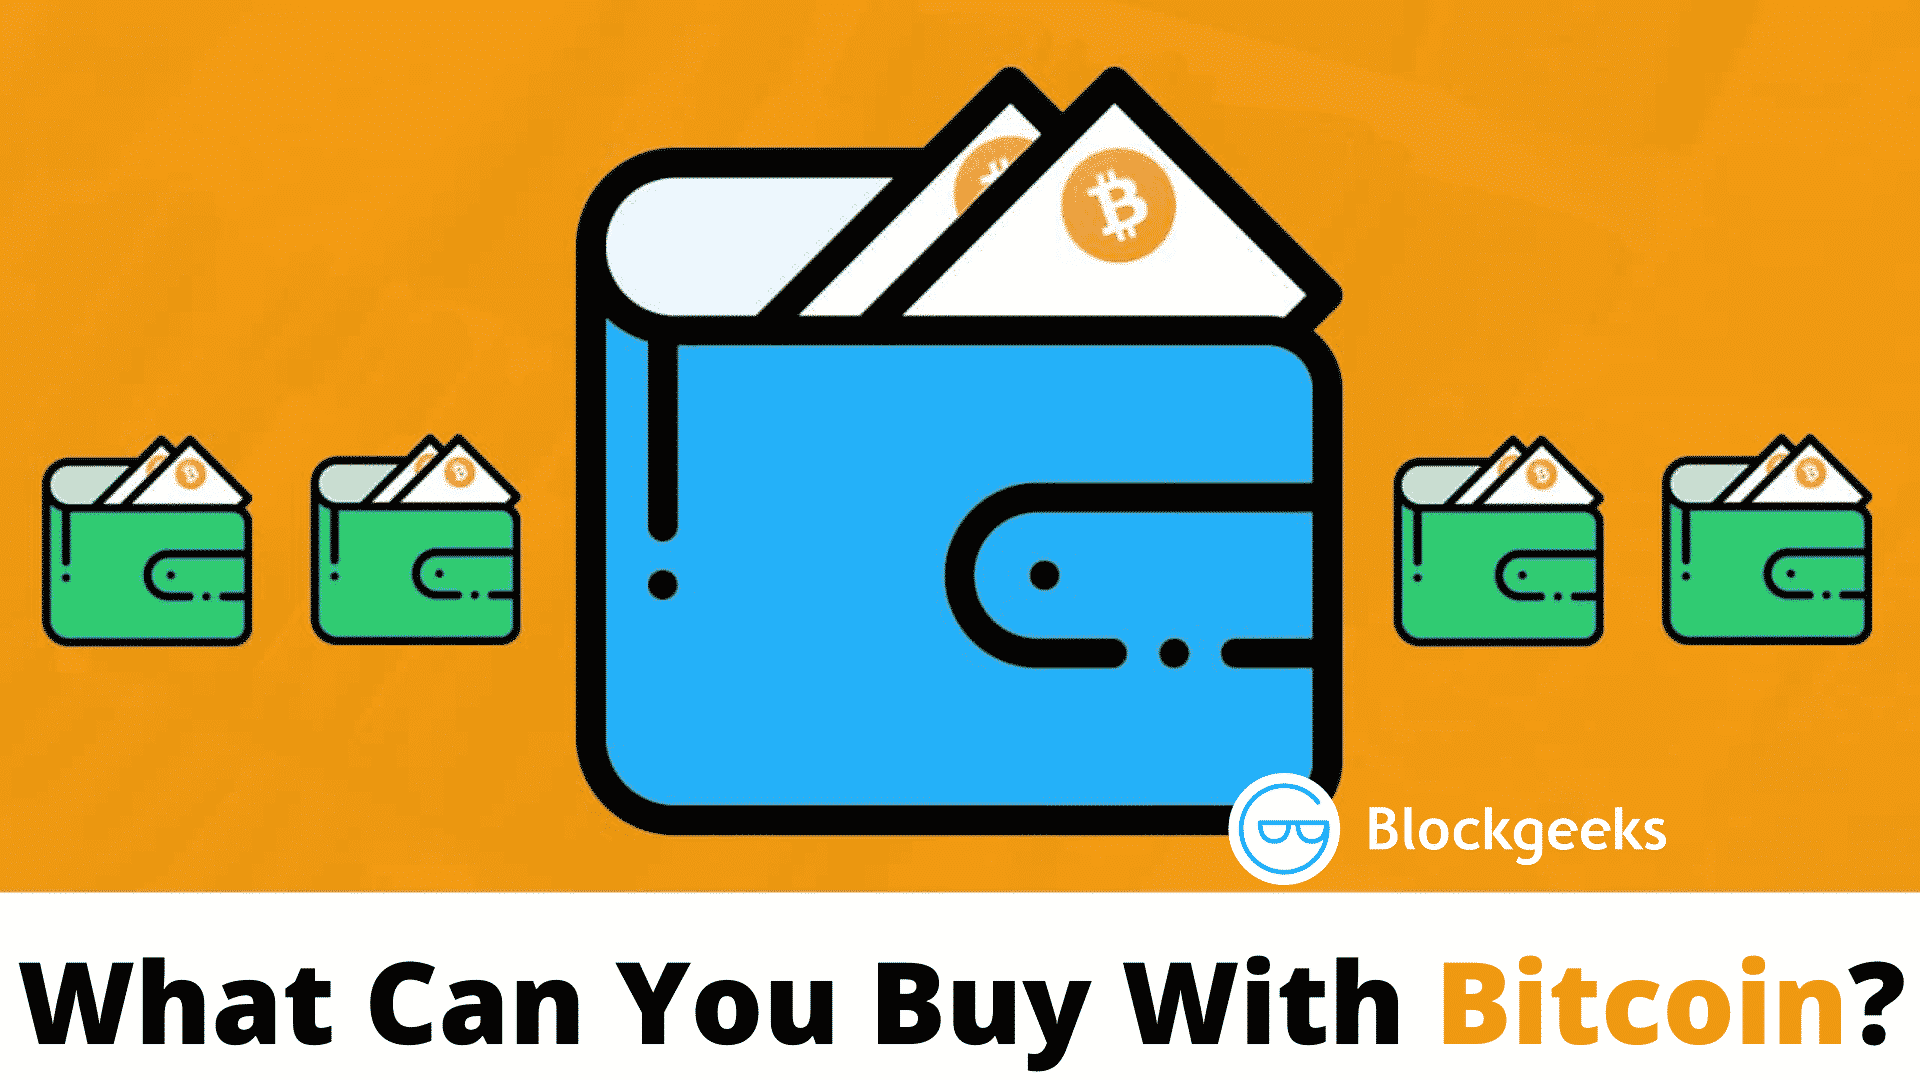 Stuff you can buy with bitcoins for dummies price to book ratio value investing world